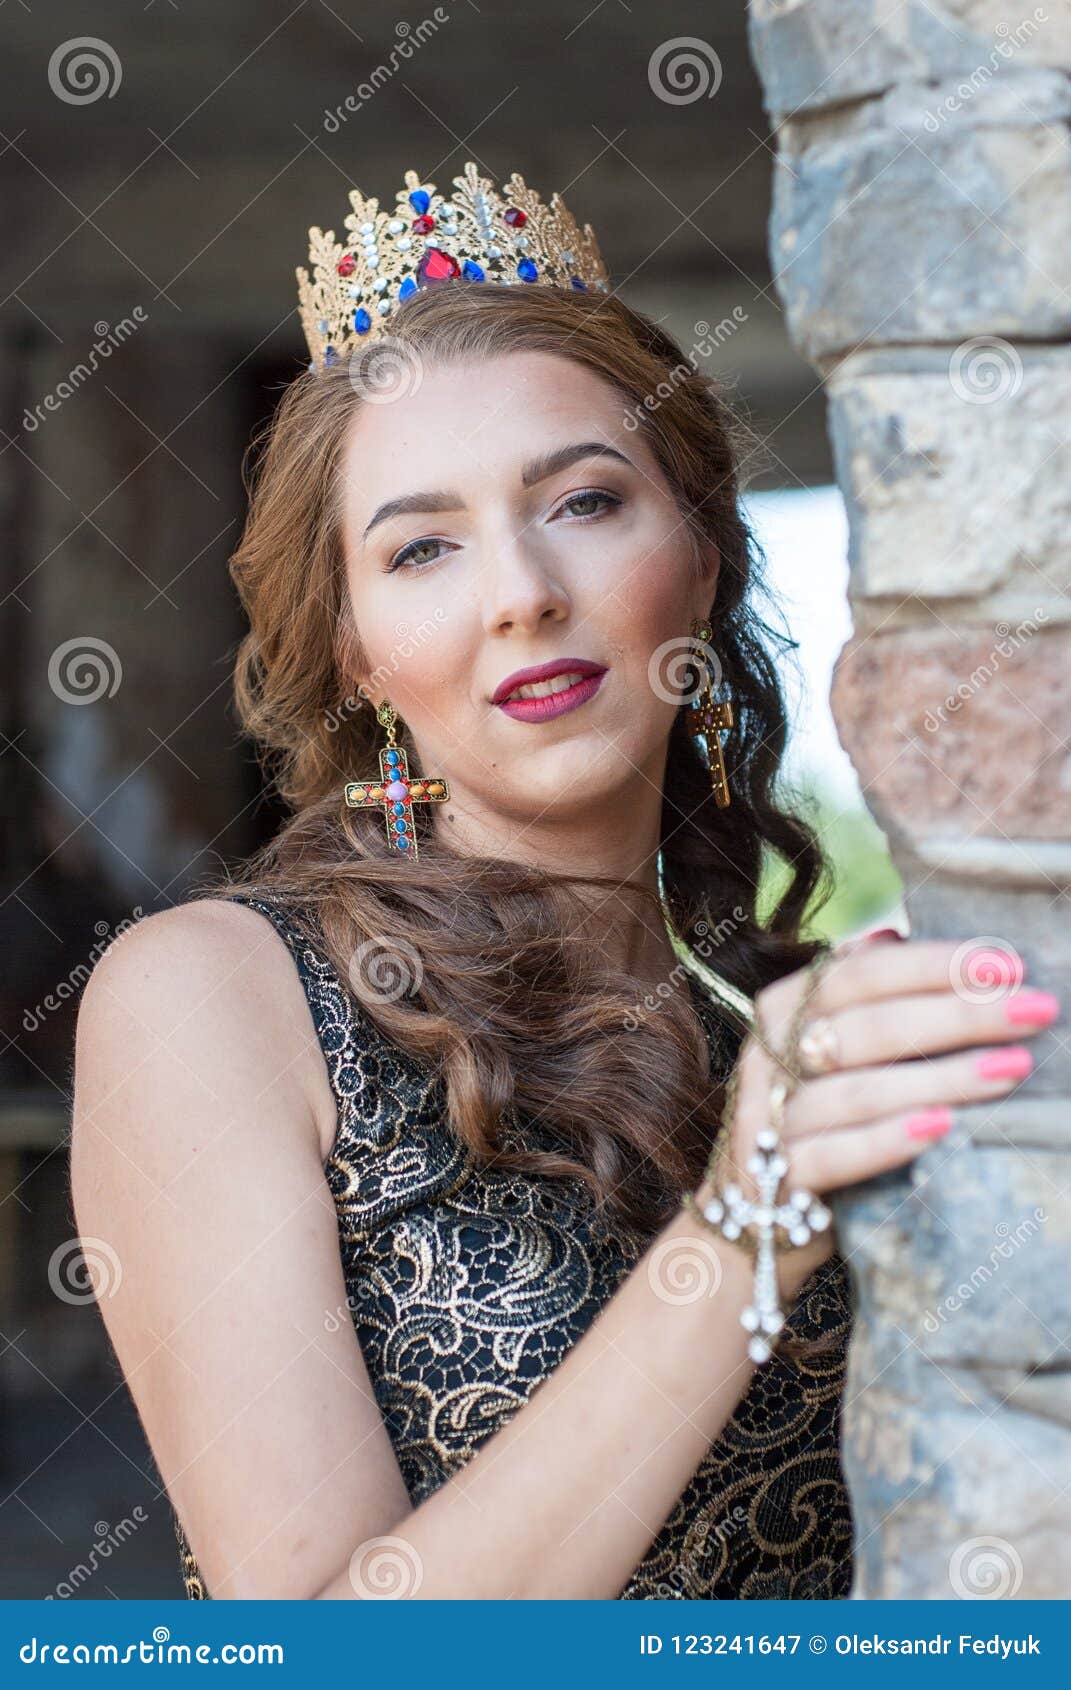 Beautiful Young Woman Posing with a Crown on Her Head Stock Image ...